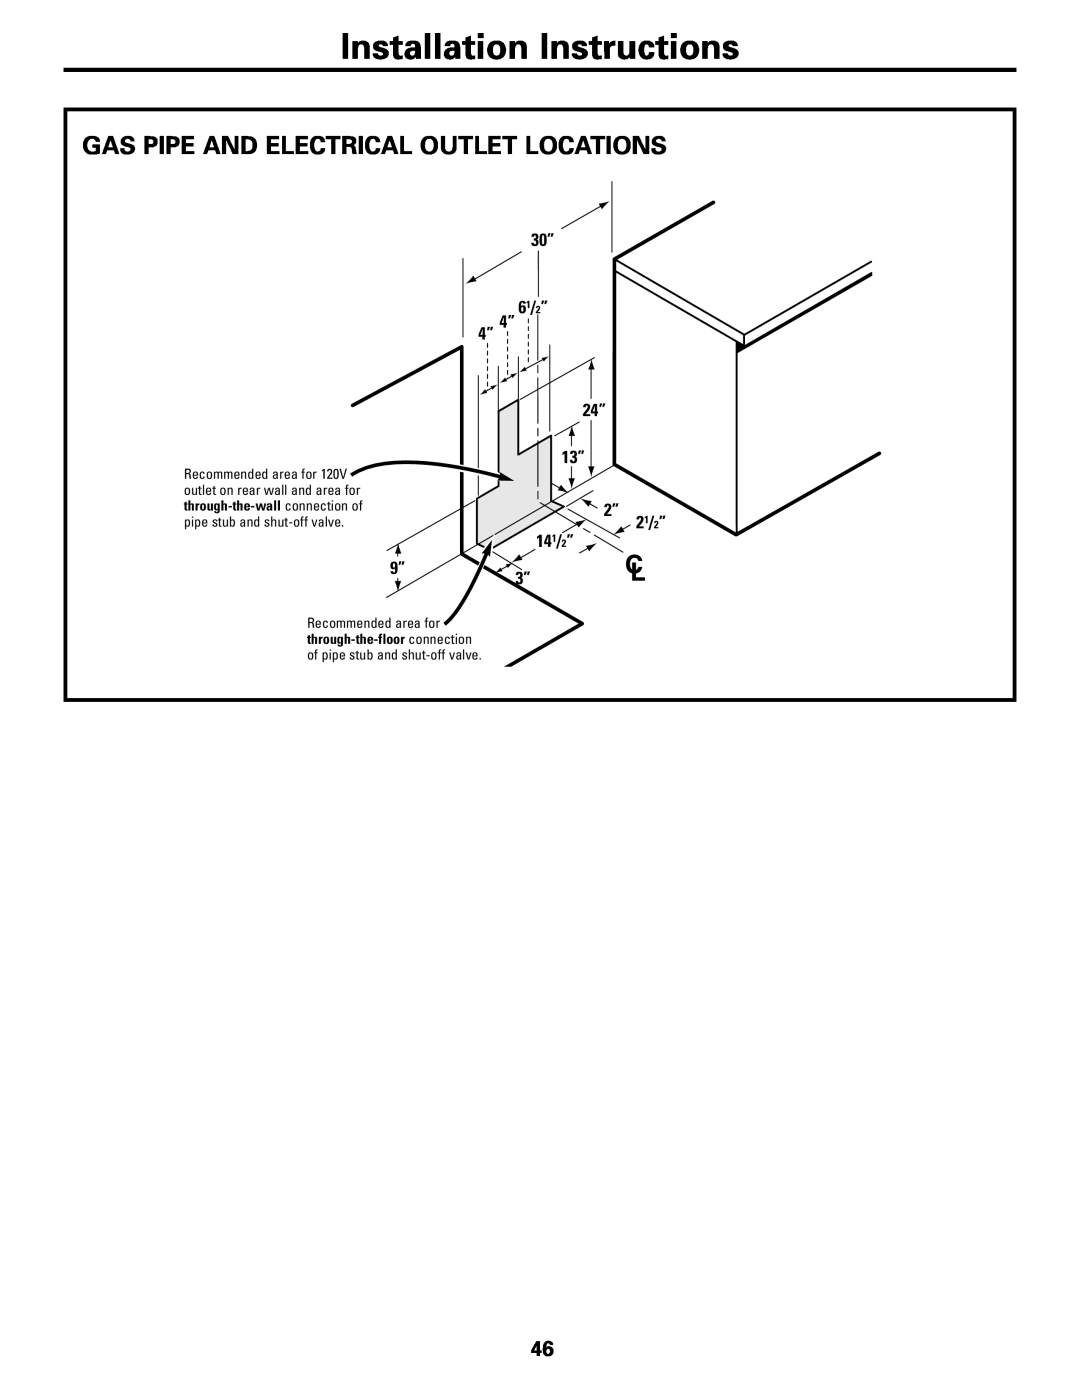 GE JGB920 Gas Pipe And Electrical Outlet Locations, Installation Instructions, 6 1/ 2”, 4” 4”, 14 1/ 2”, 2 1/ 2” 